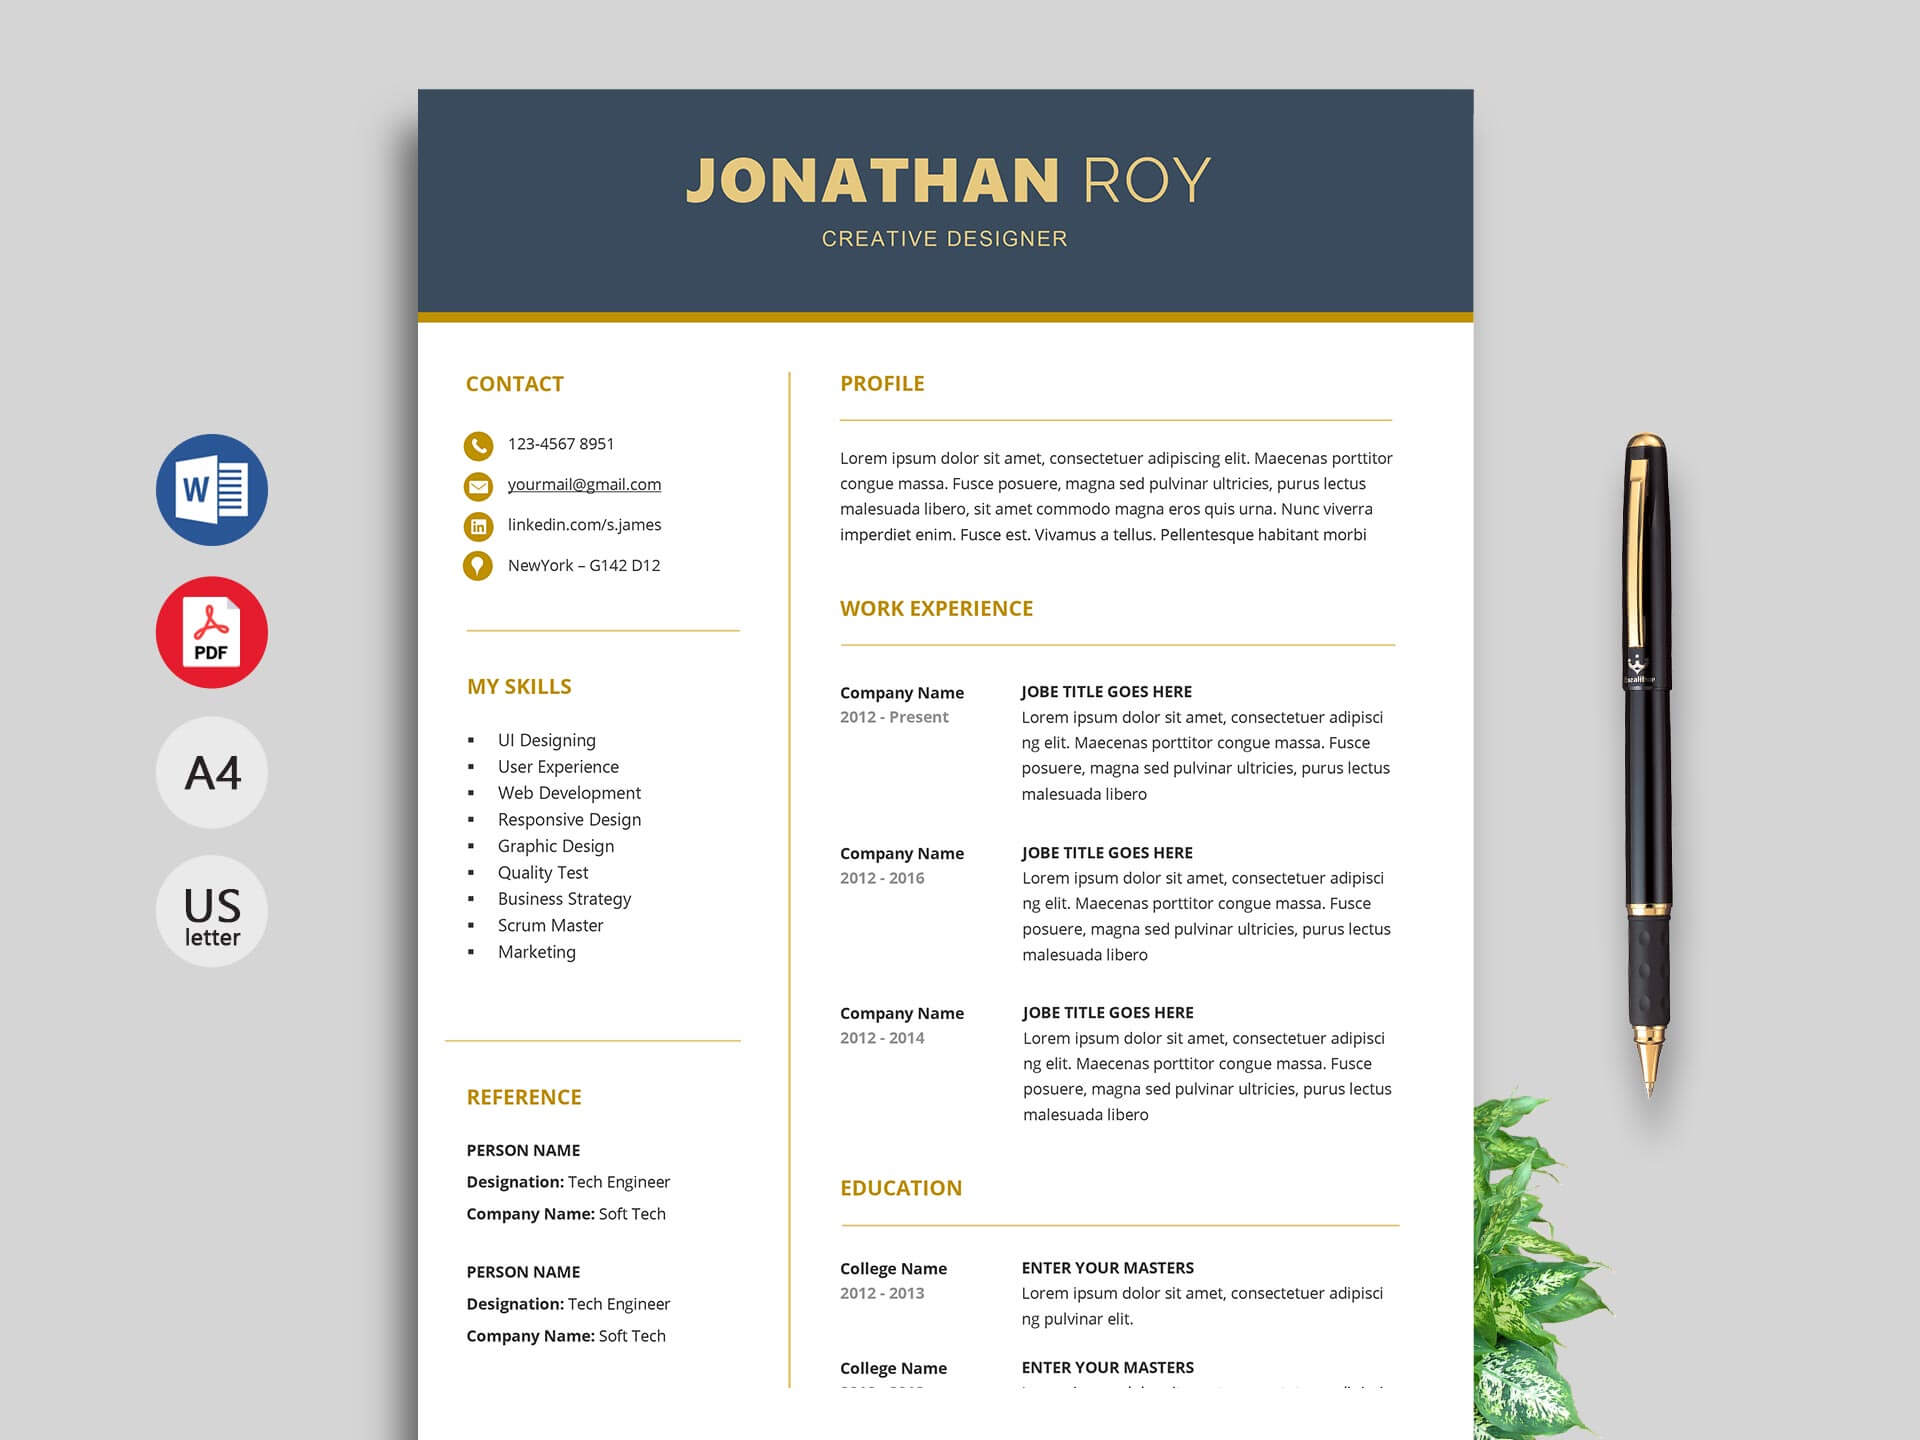 Free Resume & Cv Templates In Word Format 2020 | Resumekraft Pertaining To How To Create A Cv Template In Word